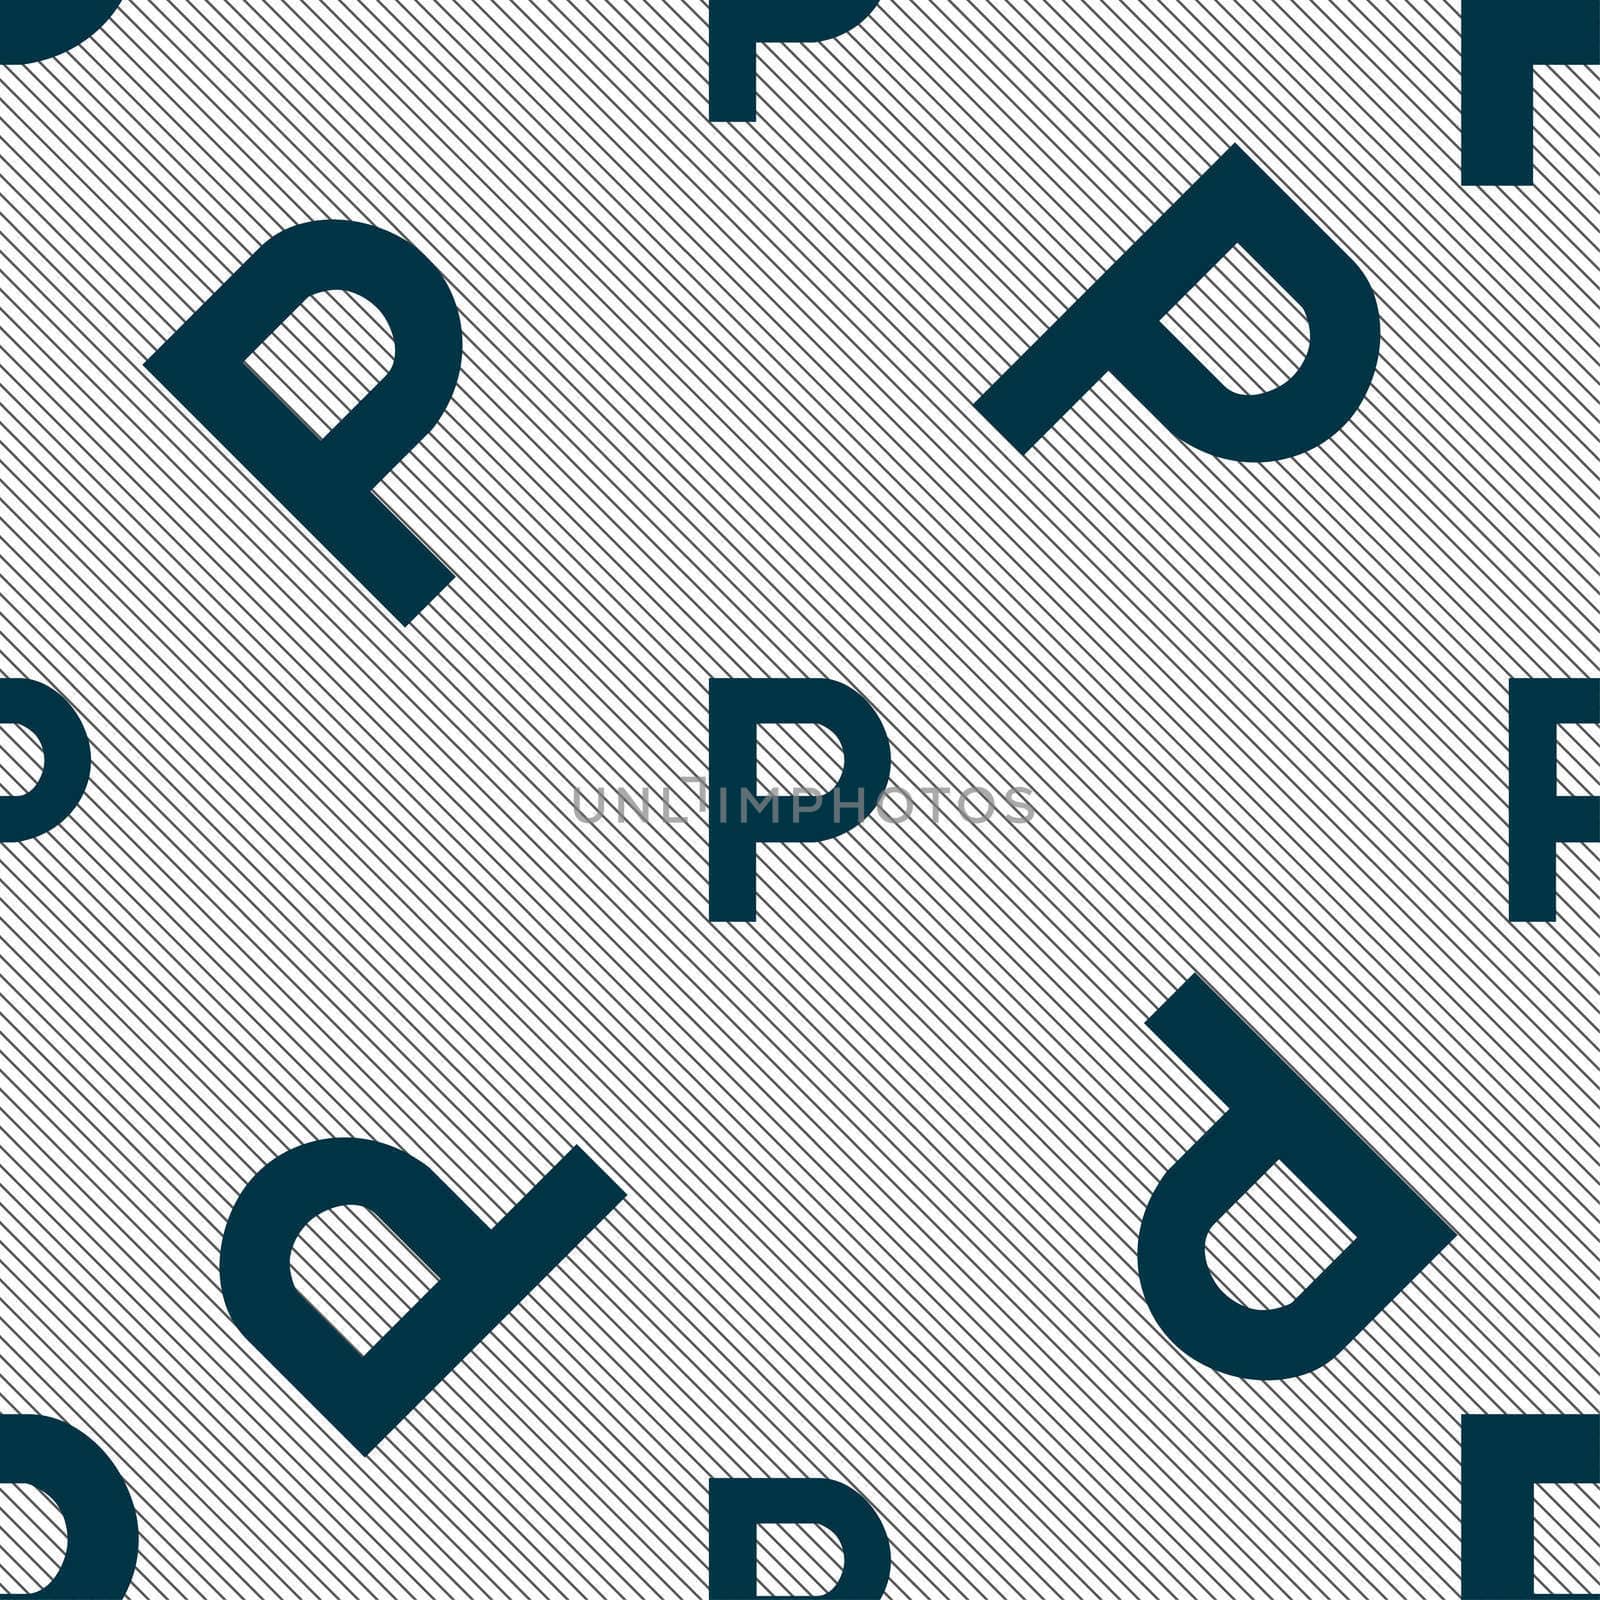 parking icon sign. Seamless pattern with geometric texture. illustration